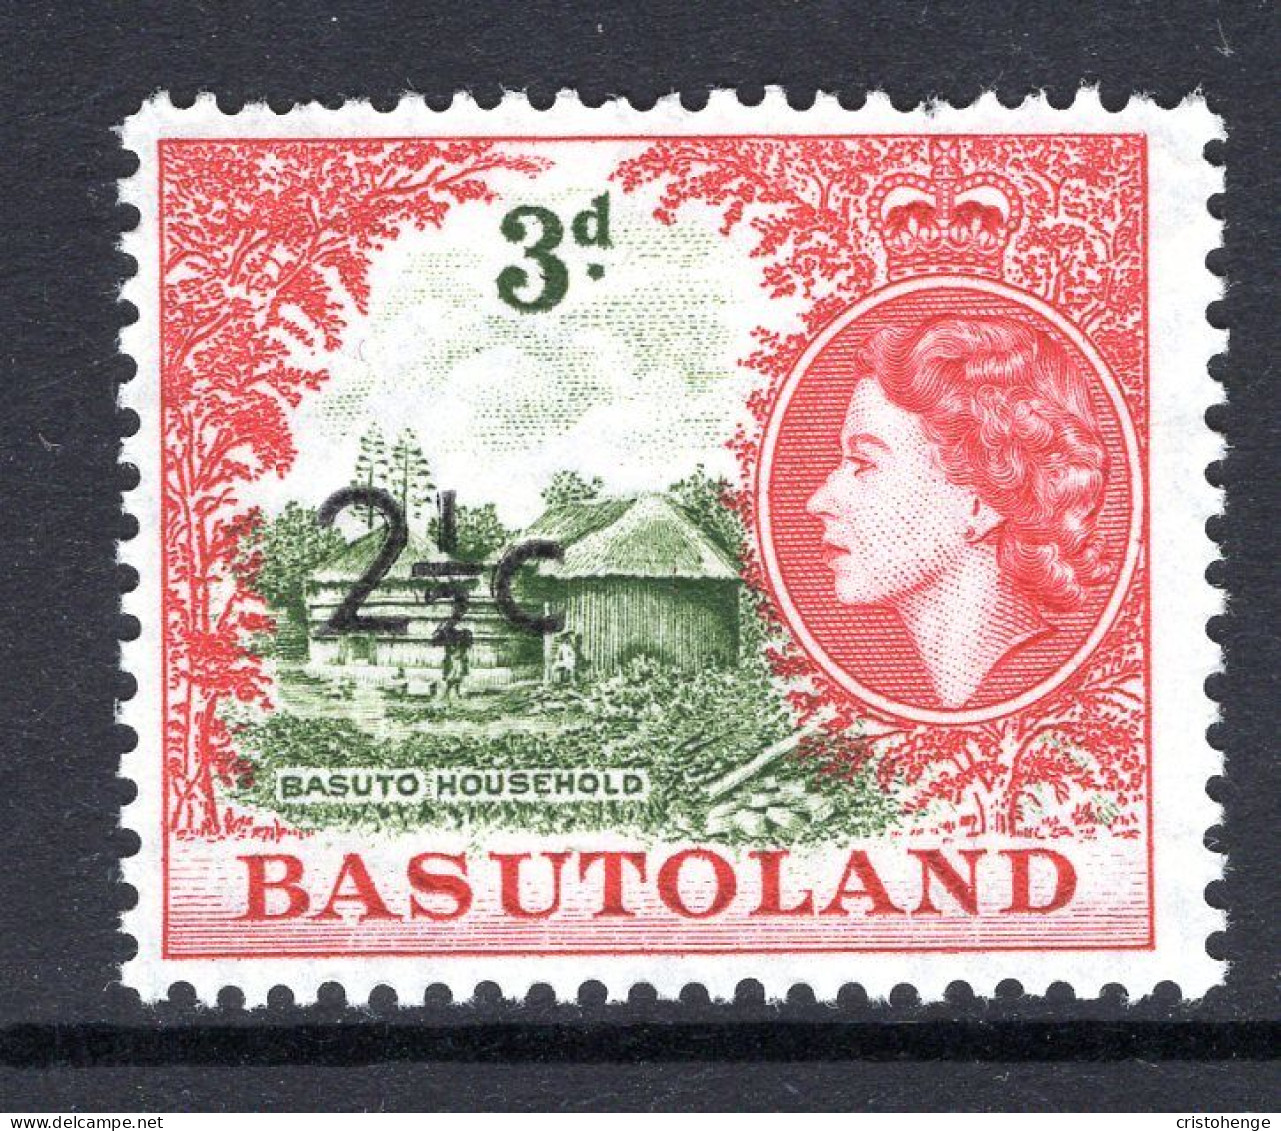 Basutoland 1961 Decimal Surcharges - 2½c On 3d Basuto Household - Type II Dropped Fraction - HM (SG 61ab) - 1933-1964 Crown Colony